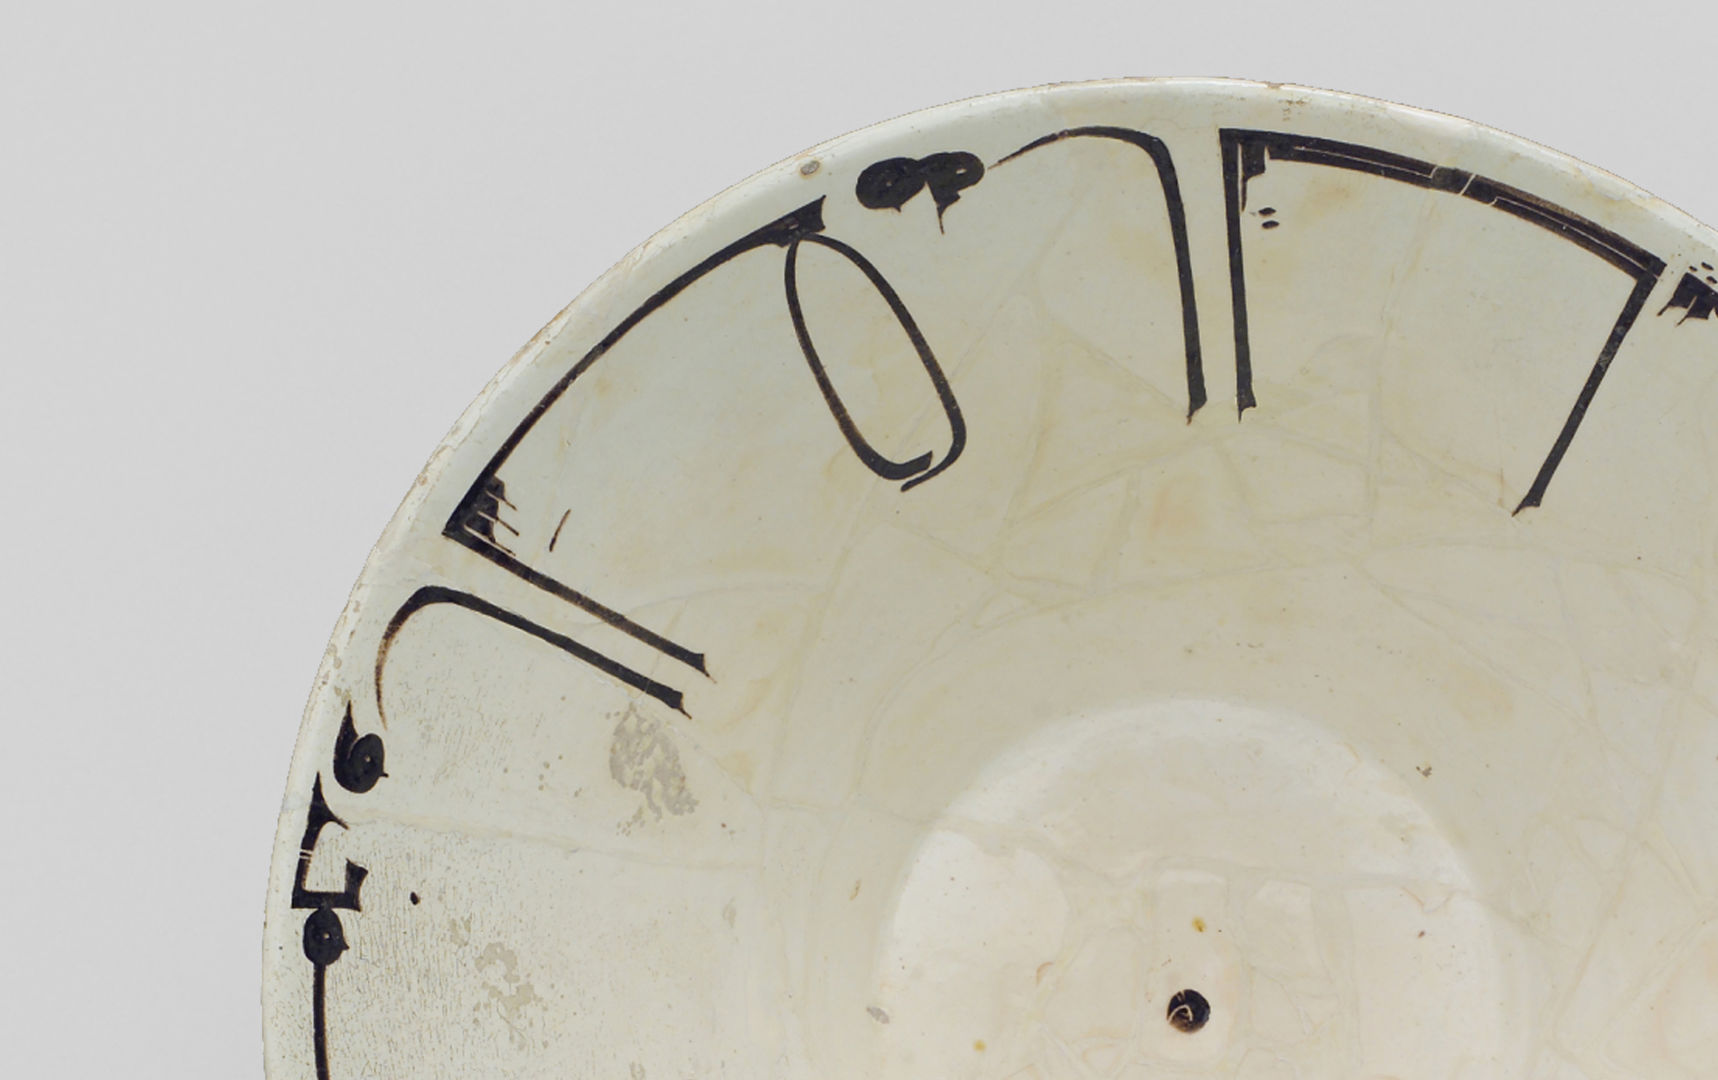 Off-white ceramic bowl with Arabic inscription photographed on a beige background